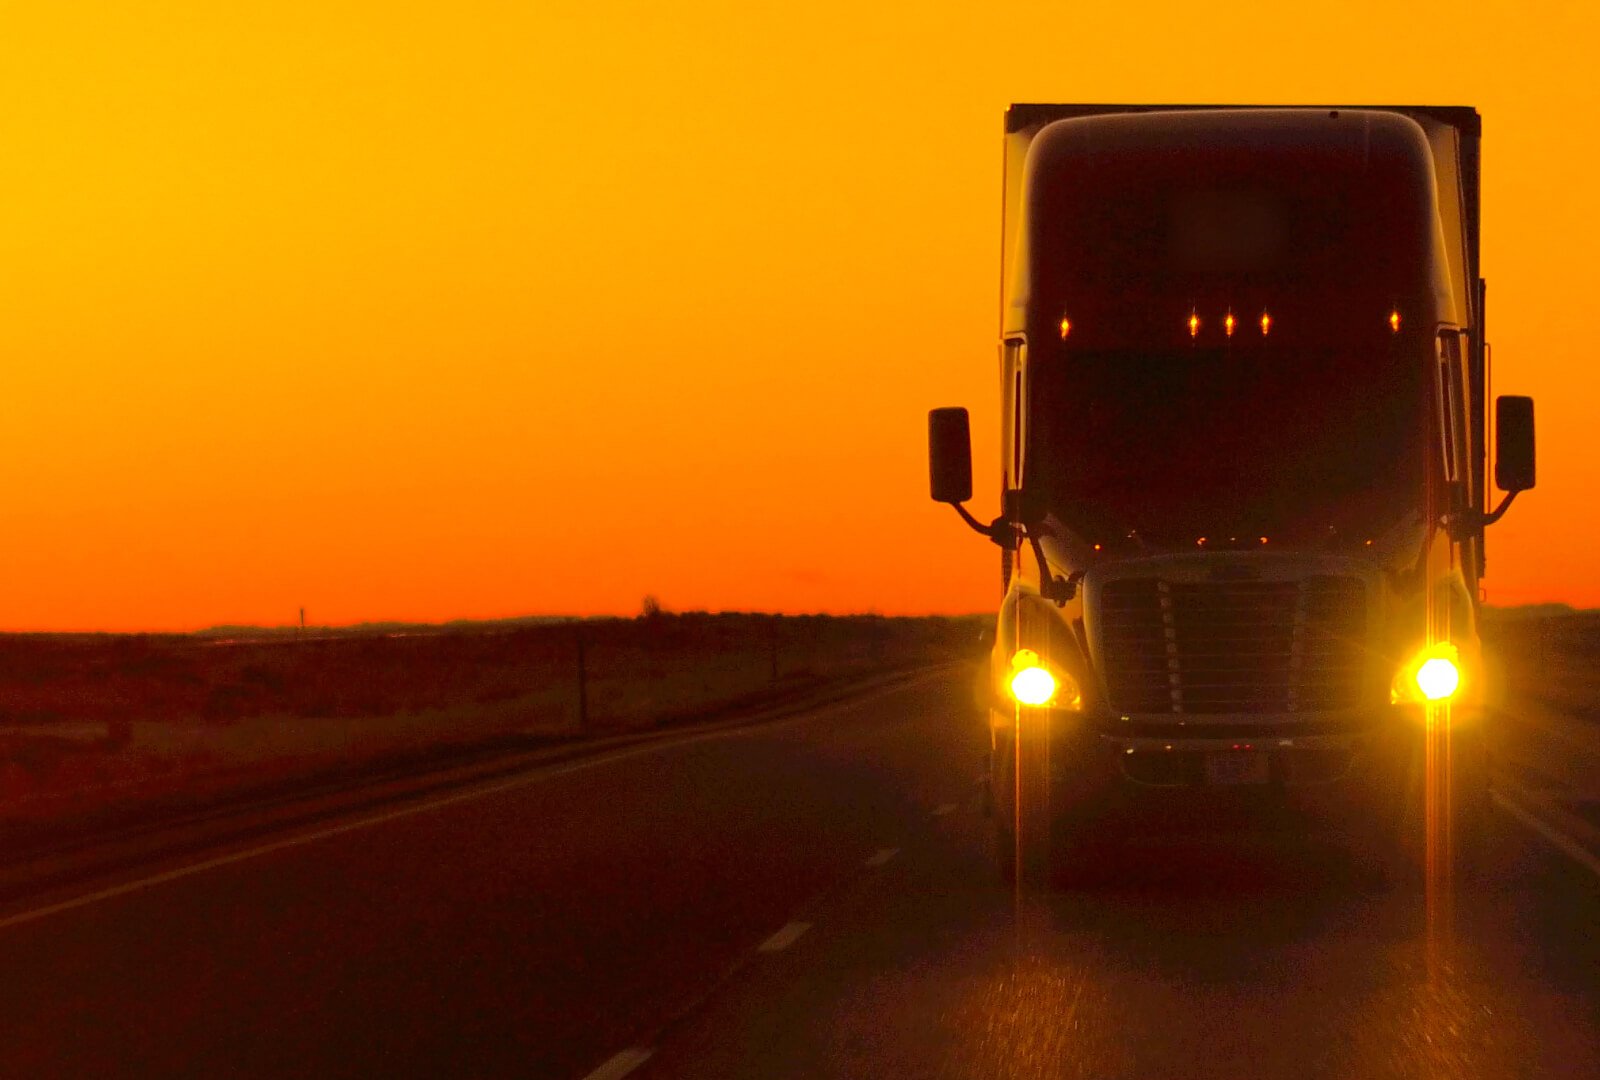 Photo of a tractor trailer truck motoring on a highway with an orange dusky sky in the background.